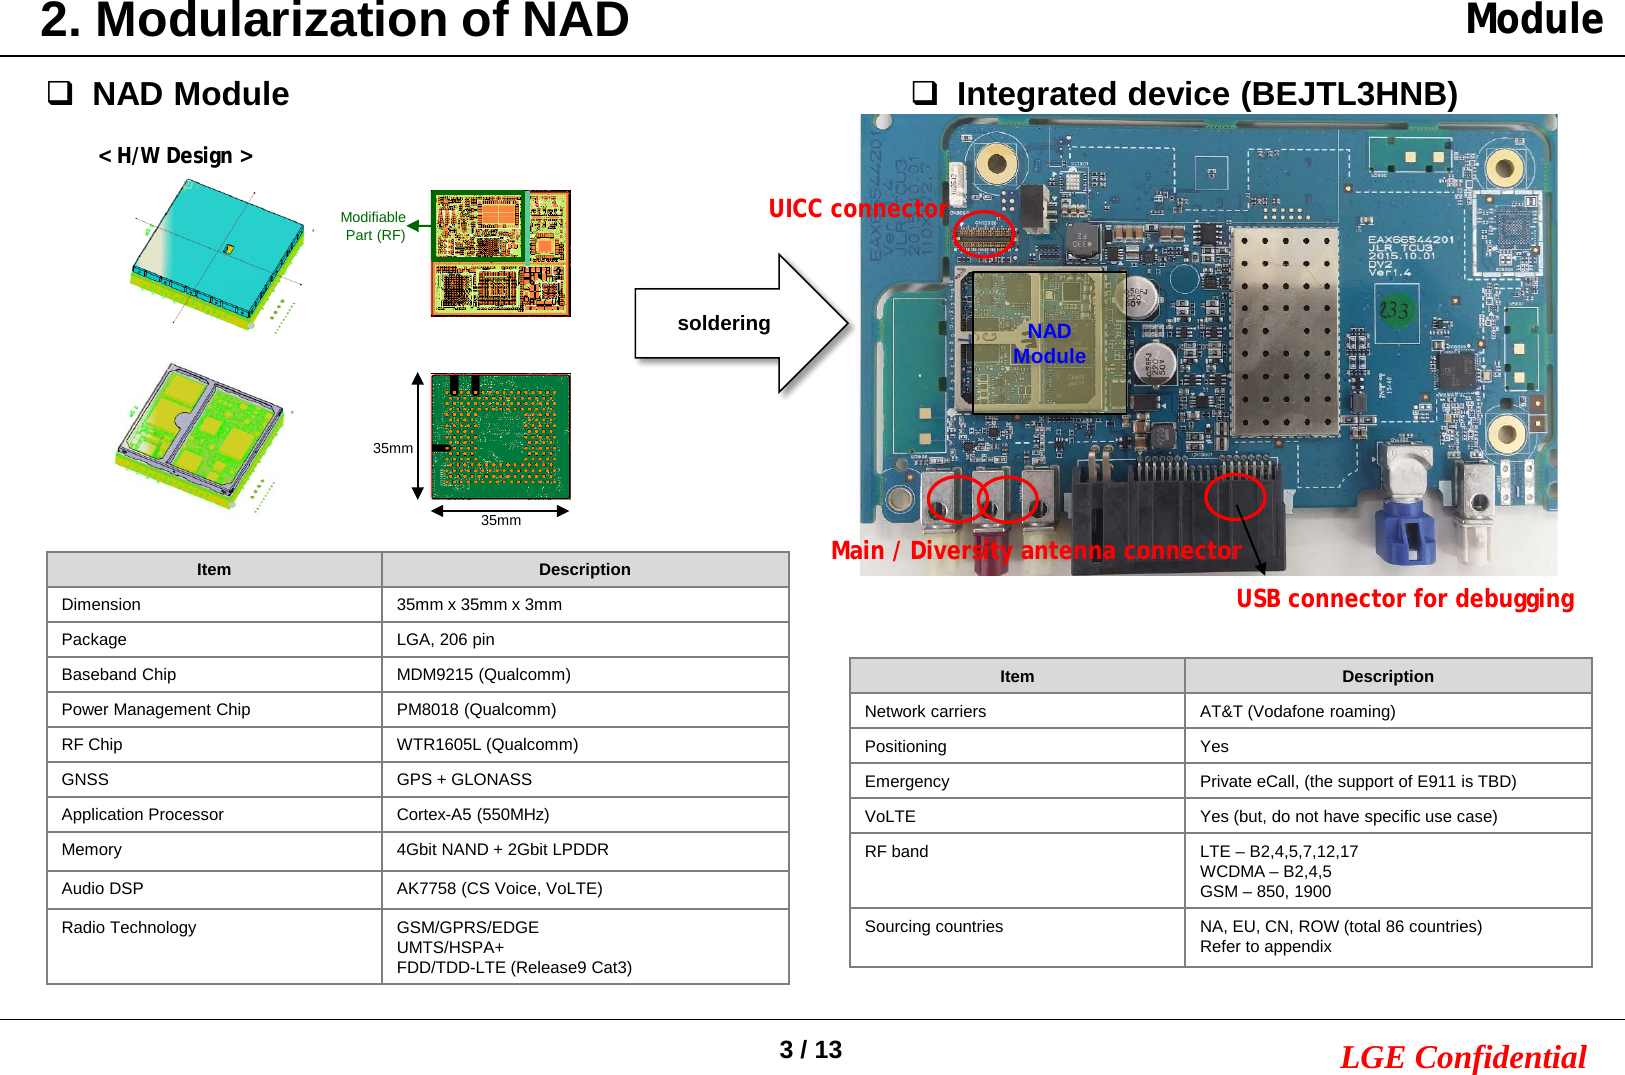 3/ 13 LGE ConfidentialNAD Module35mmModifiable Part (RF)&lt; H/W Design &gt;35mmItem DescriptionDimension 35mm x 35mm x 3mmPackage LGA, 206 pinBaseband Chip MDM9215 (Qualcomm)Power Management Chip PM8018 (Qualcomm)RF Chip WTR1605L (Qualcomm)GNSS GPS + GLONASSApplication Processor Cortex-A5 (550MHz)Memory  4Gbit NAND + 2Gbit LPDDRAudio DSP AK7758 (CS Voice, VoLTE)Radio Technology GSM/GPRS/EDGEUMTS/HSPA+FDD/TDD-LTE (Release9 Cat3)Integrated device (BEJTL3HNB)soldering NAD ModuleMain / Diversity antenna connectorUICC connectorUSB connector for debuggingItem DescriptionNetwork carriers AT&amp;T (Vodafone roaming)Positioning YesEmergency Private eCall, (the support of E911 is TBD)VoLTE Yes (but, do not have specific use case)RF band LTE –B2,4,5,7,12,17WCDMA –B2,4,5GSM –850, 1900Sourcing countries NA, EU, CN, ROW (total 86 countries)Refer to appendix2. Modularization of NAD Module